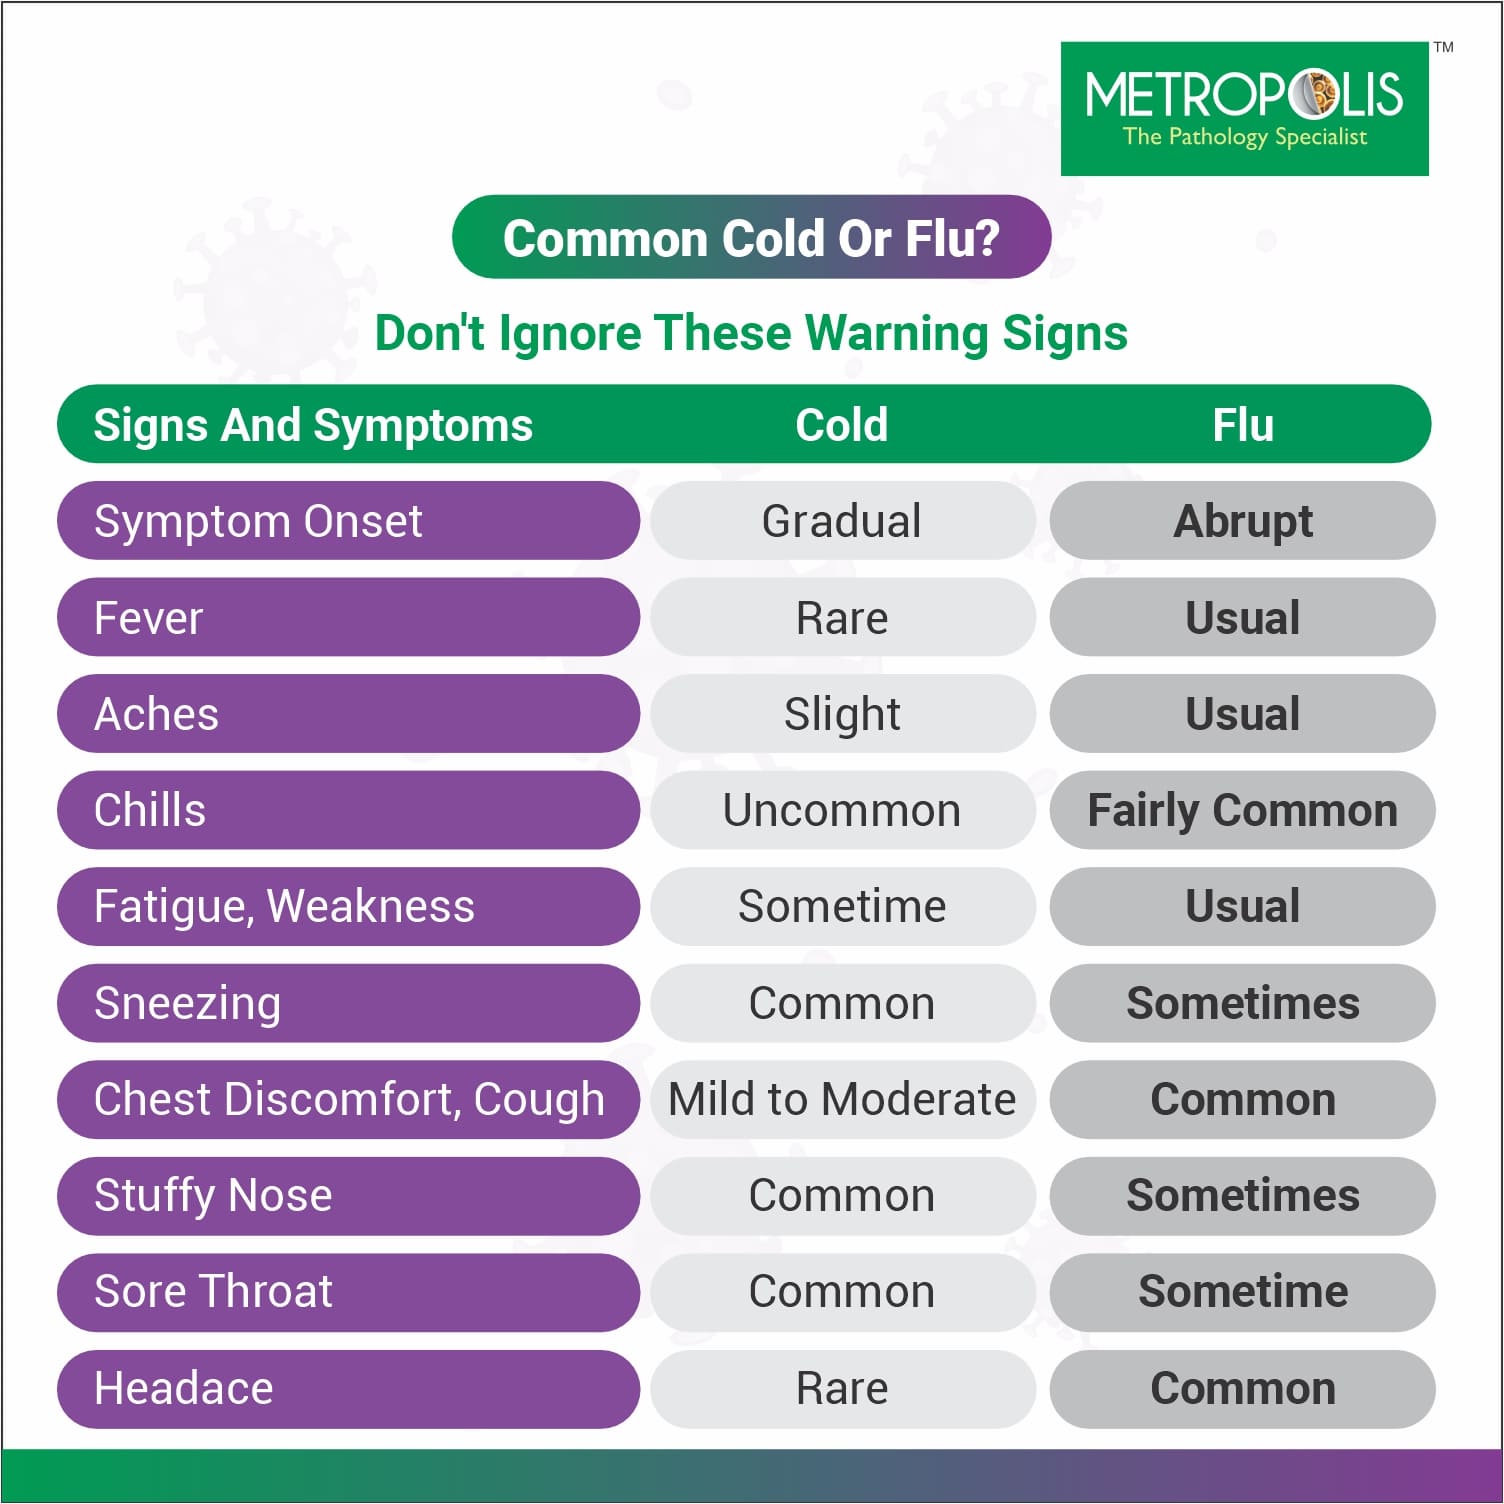 Warning signs of Cold and Flu